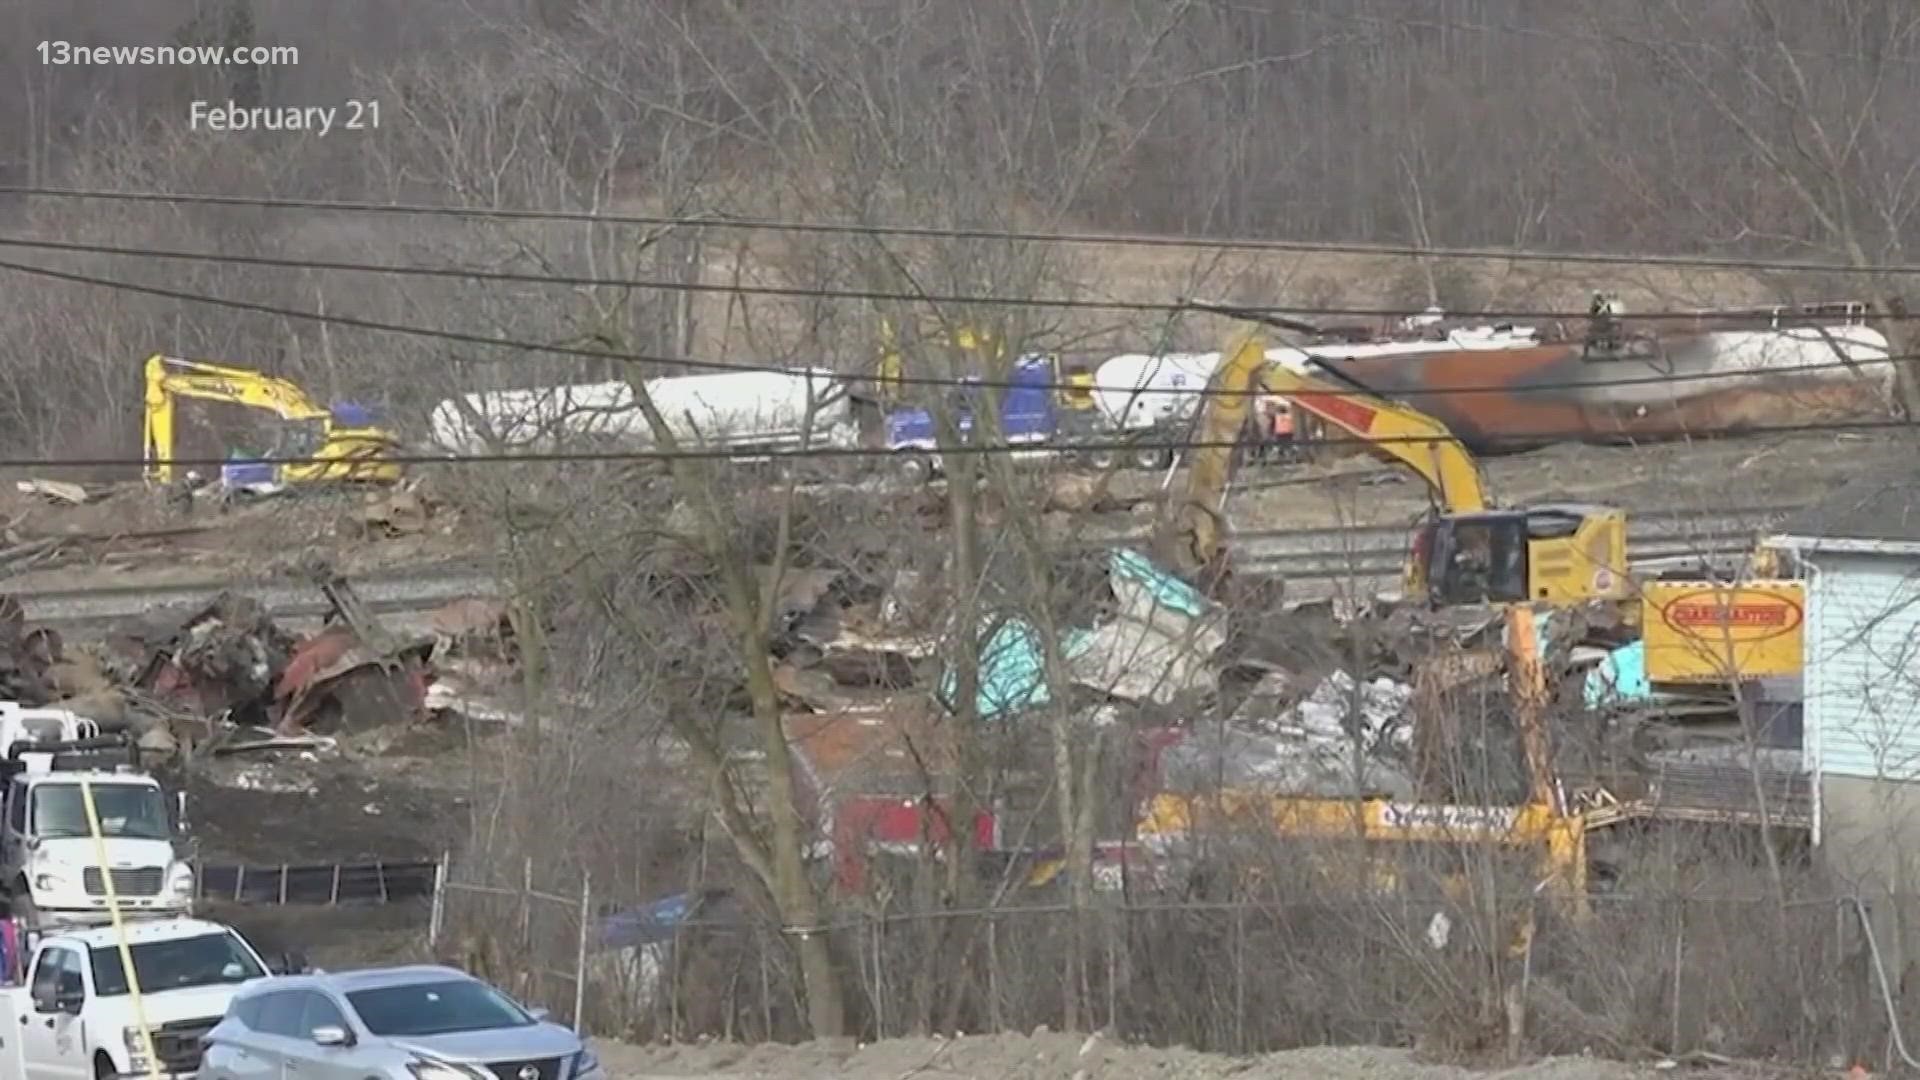 If a train derailed in a dense area, a report from a Pennsylvania non-profit shows millions of residents live within the potential blast radius.